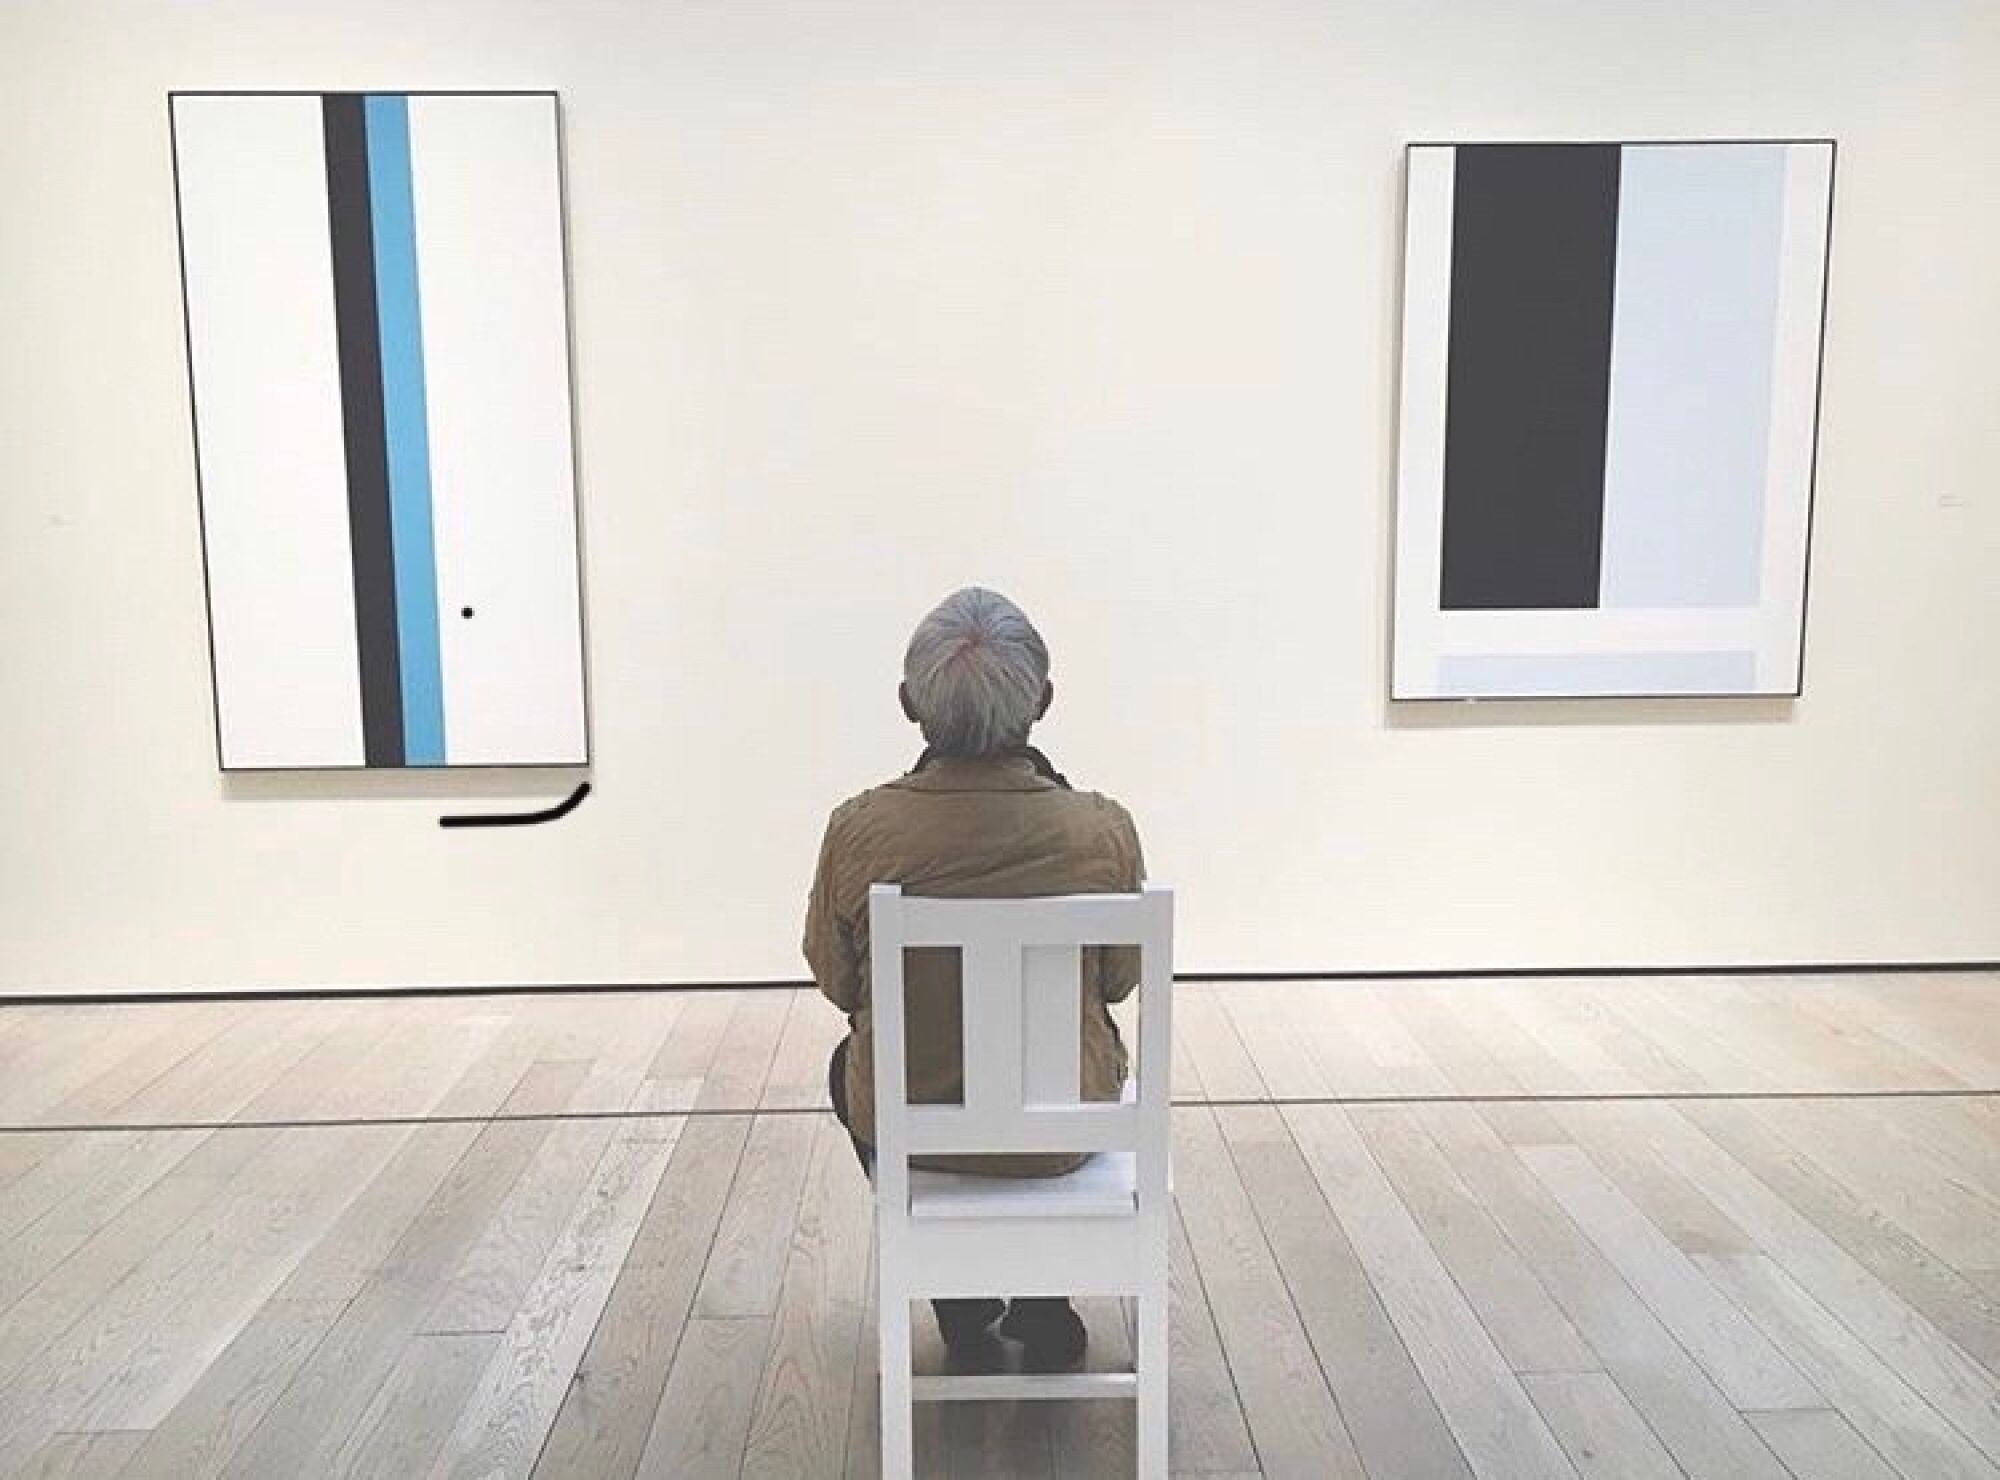 Ben Barcelona considers work in the exhibition “John McLaughlin Paintings: Total Abstraction” at LACMA in 2017.